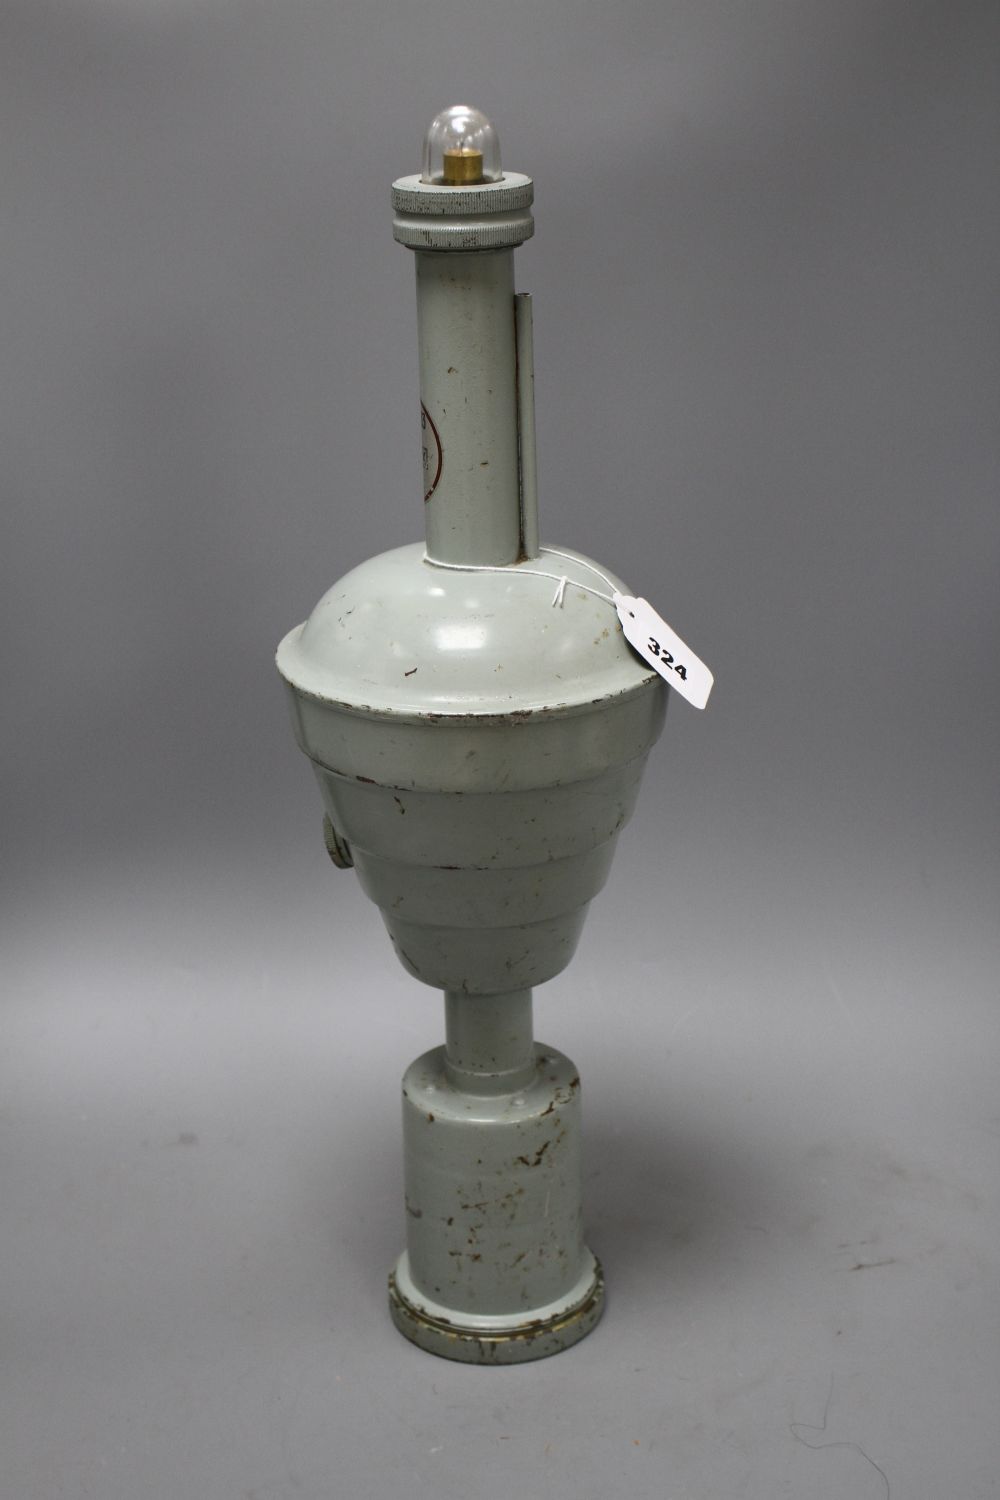 A Londex pale blue Royal Naval floating signal lamp, numbered AP16213 1961, height 53cm